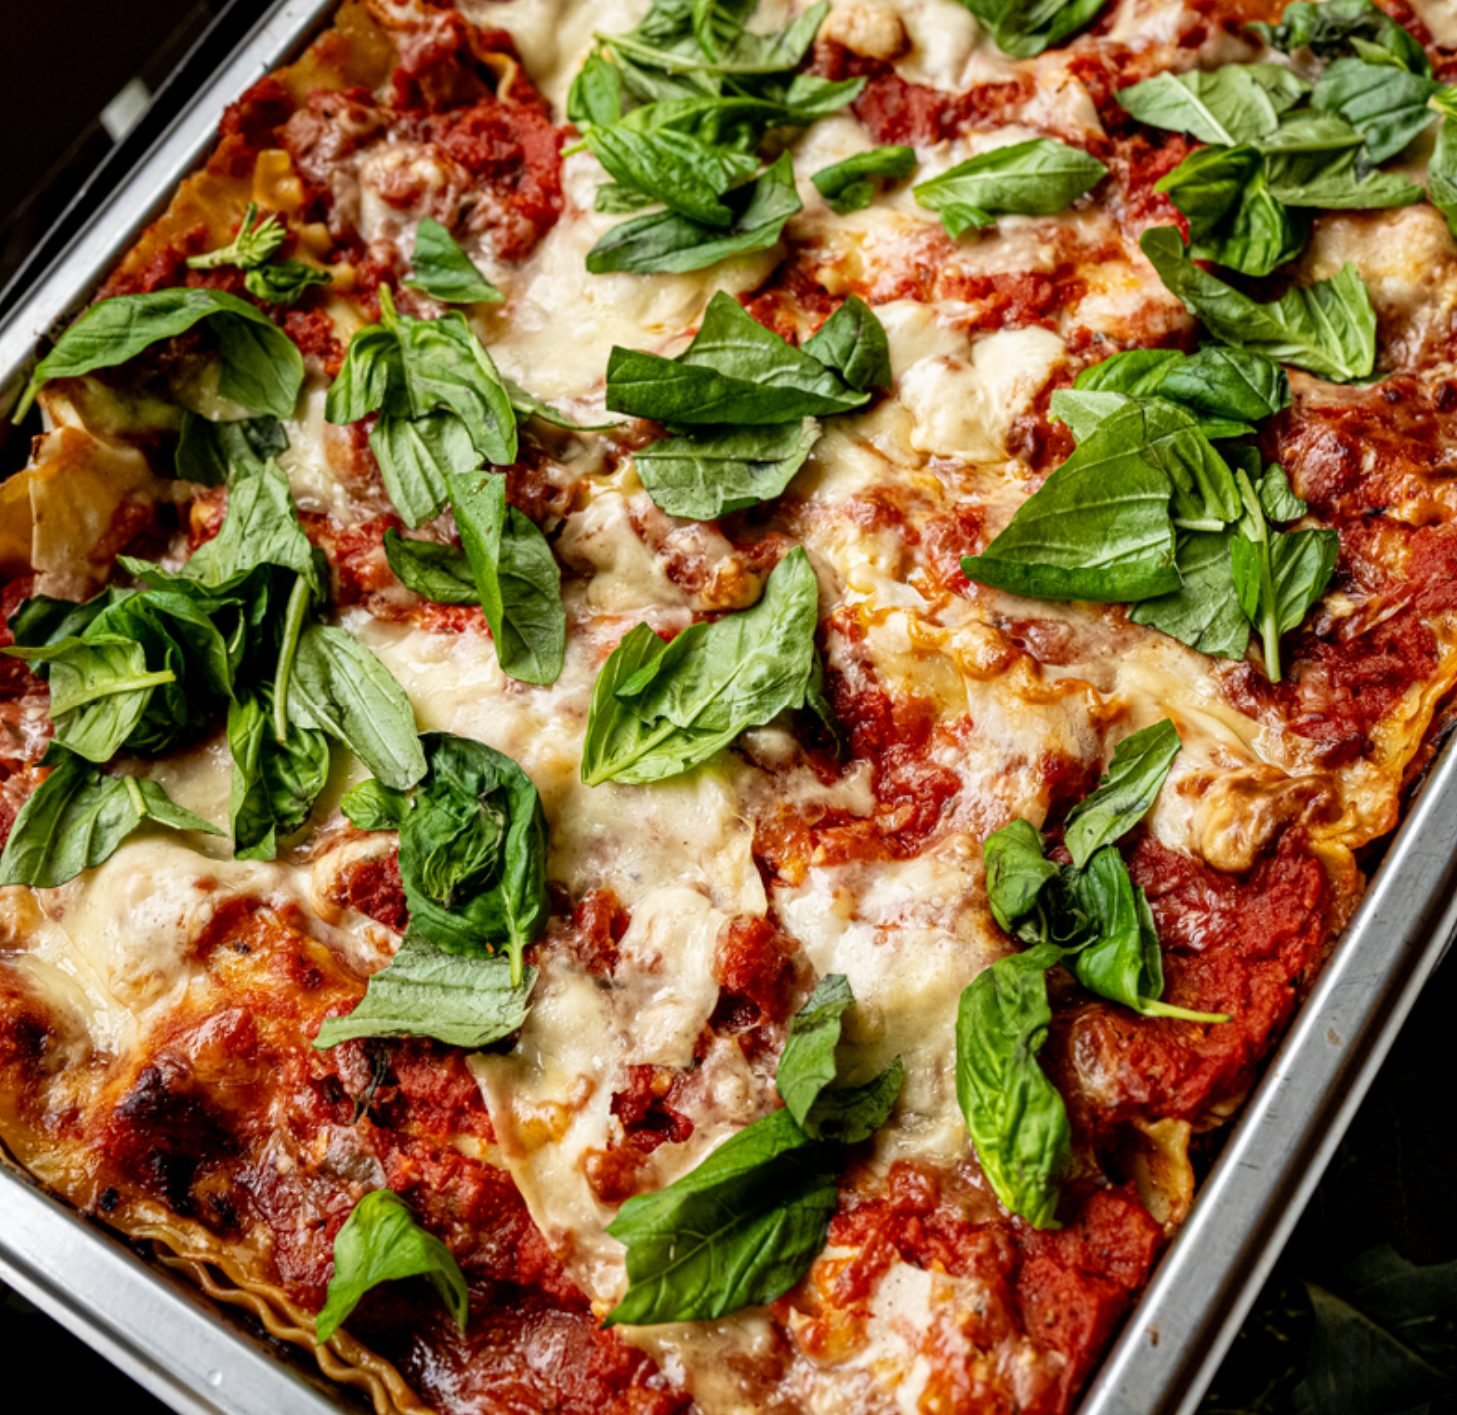 Bring the classic comfort of lasagna to your buffet-style wedding with Actual Food Nashville. Our lasagna is always a crowd-pleaser, delivering layers of flavor and warmth to every plate! 🍝✨
.
.
.
#nashvillecatering #lasagna #buffetstyle #catering #